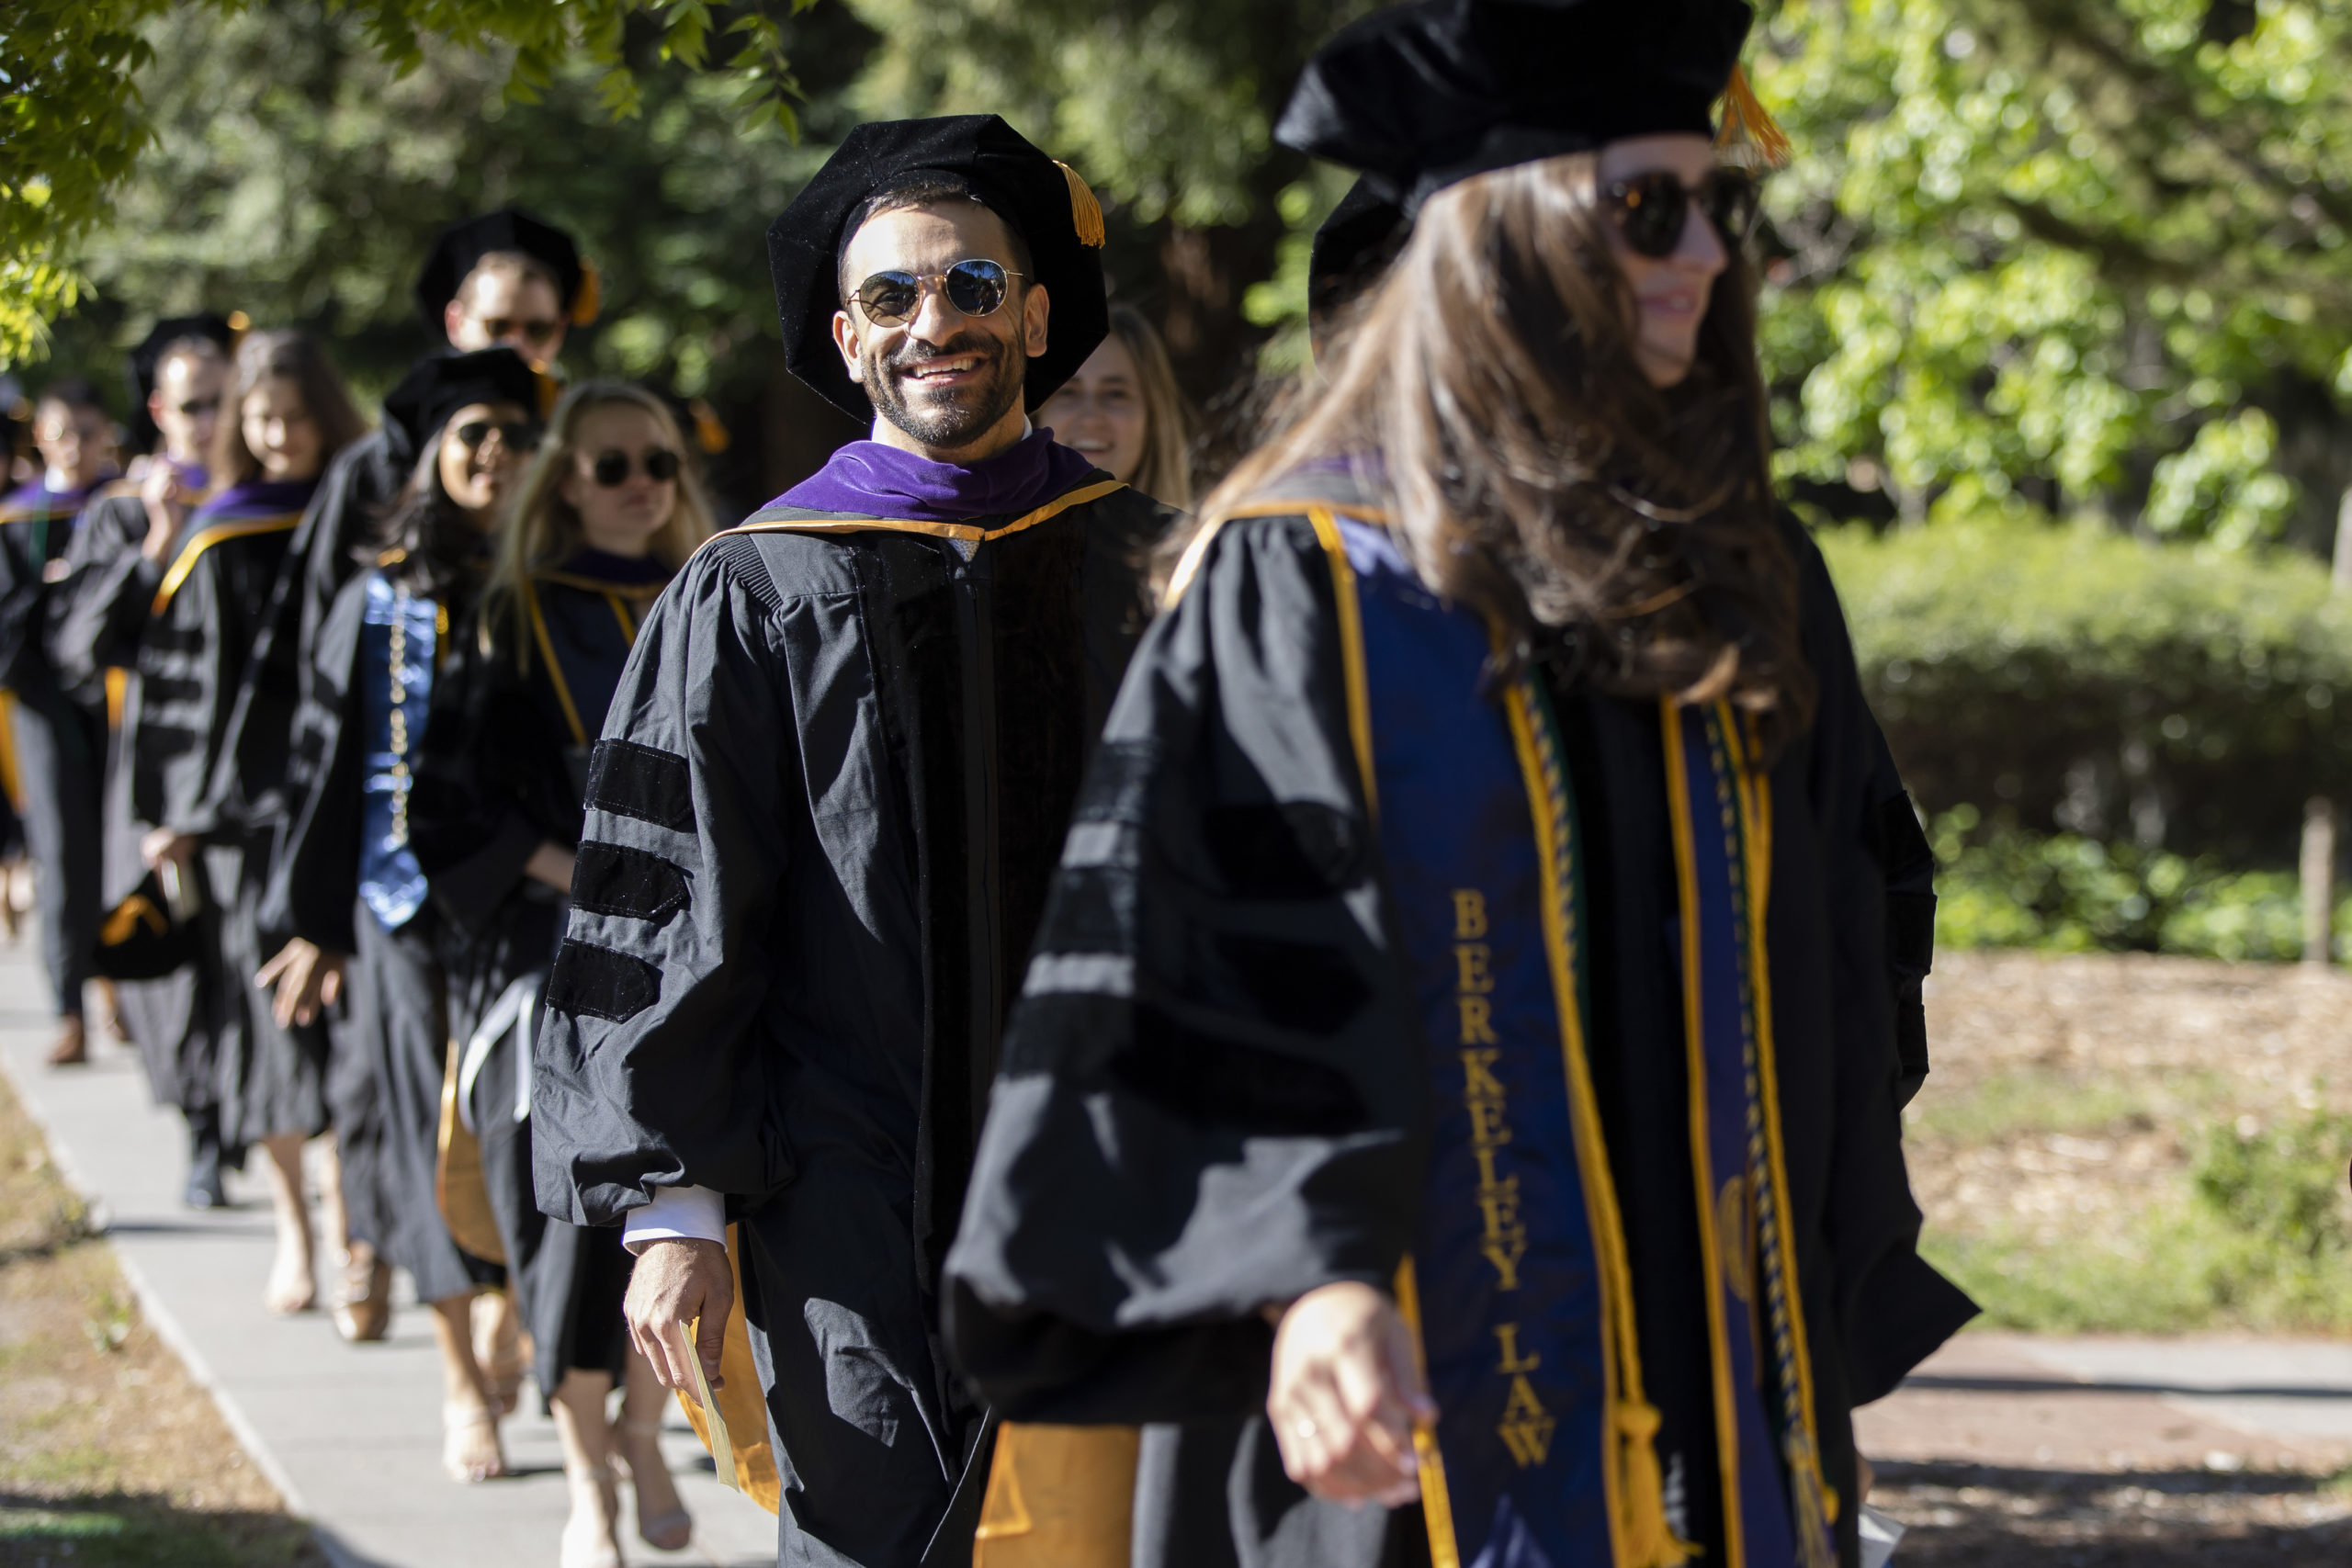 Students walking in a line wearing commencement regalia.